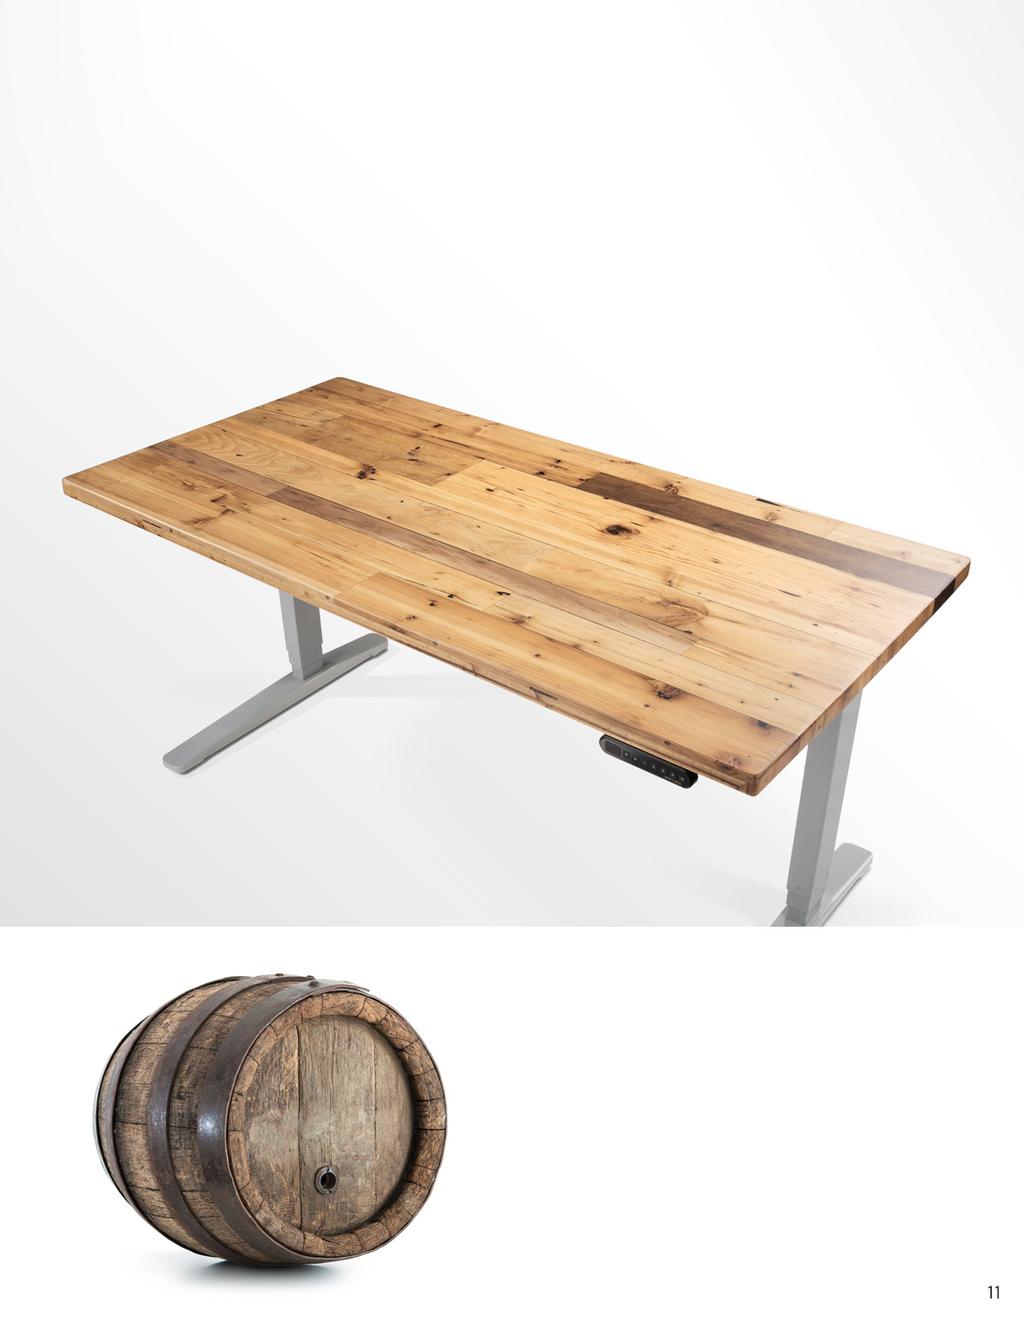 Reclaimed Wood Vintage Wood Renewed Available in 48, 60, and 72 inch widths and 30 inch depths, our distinctive reclaimed wood tops are handcrafted out of beautifully time-worn Douglas fir or teak